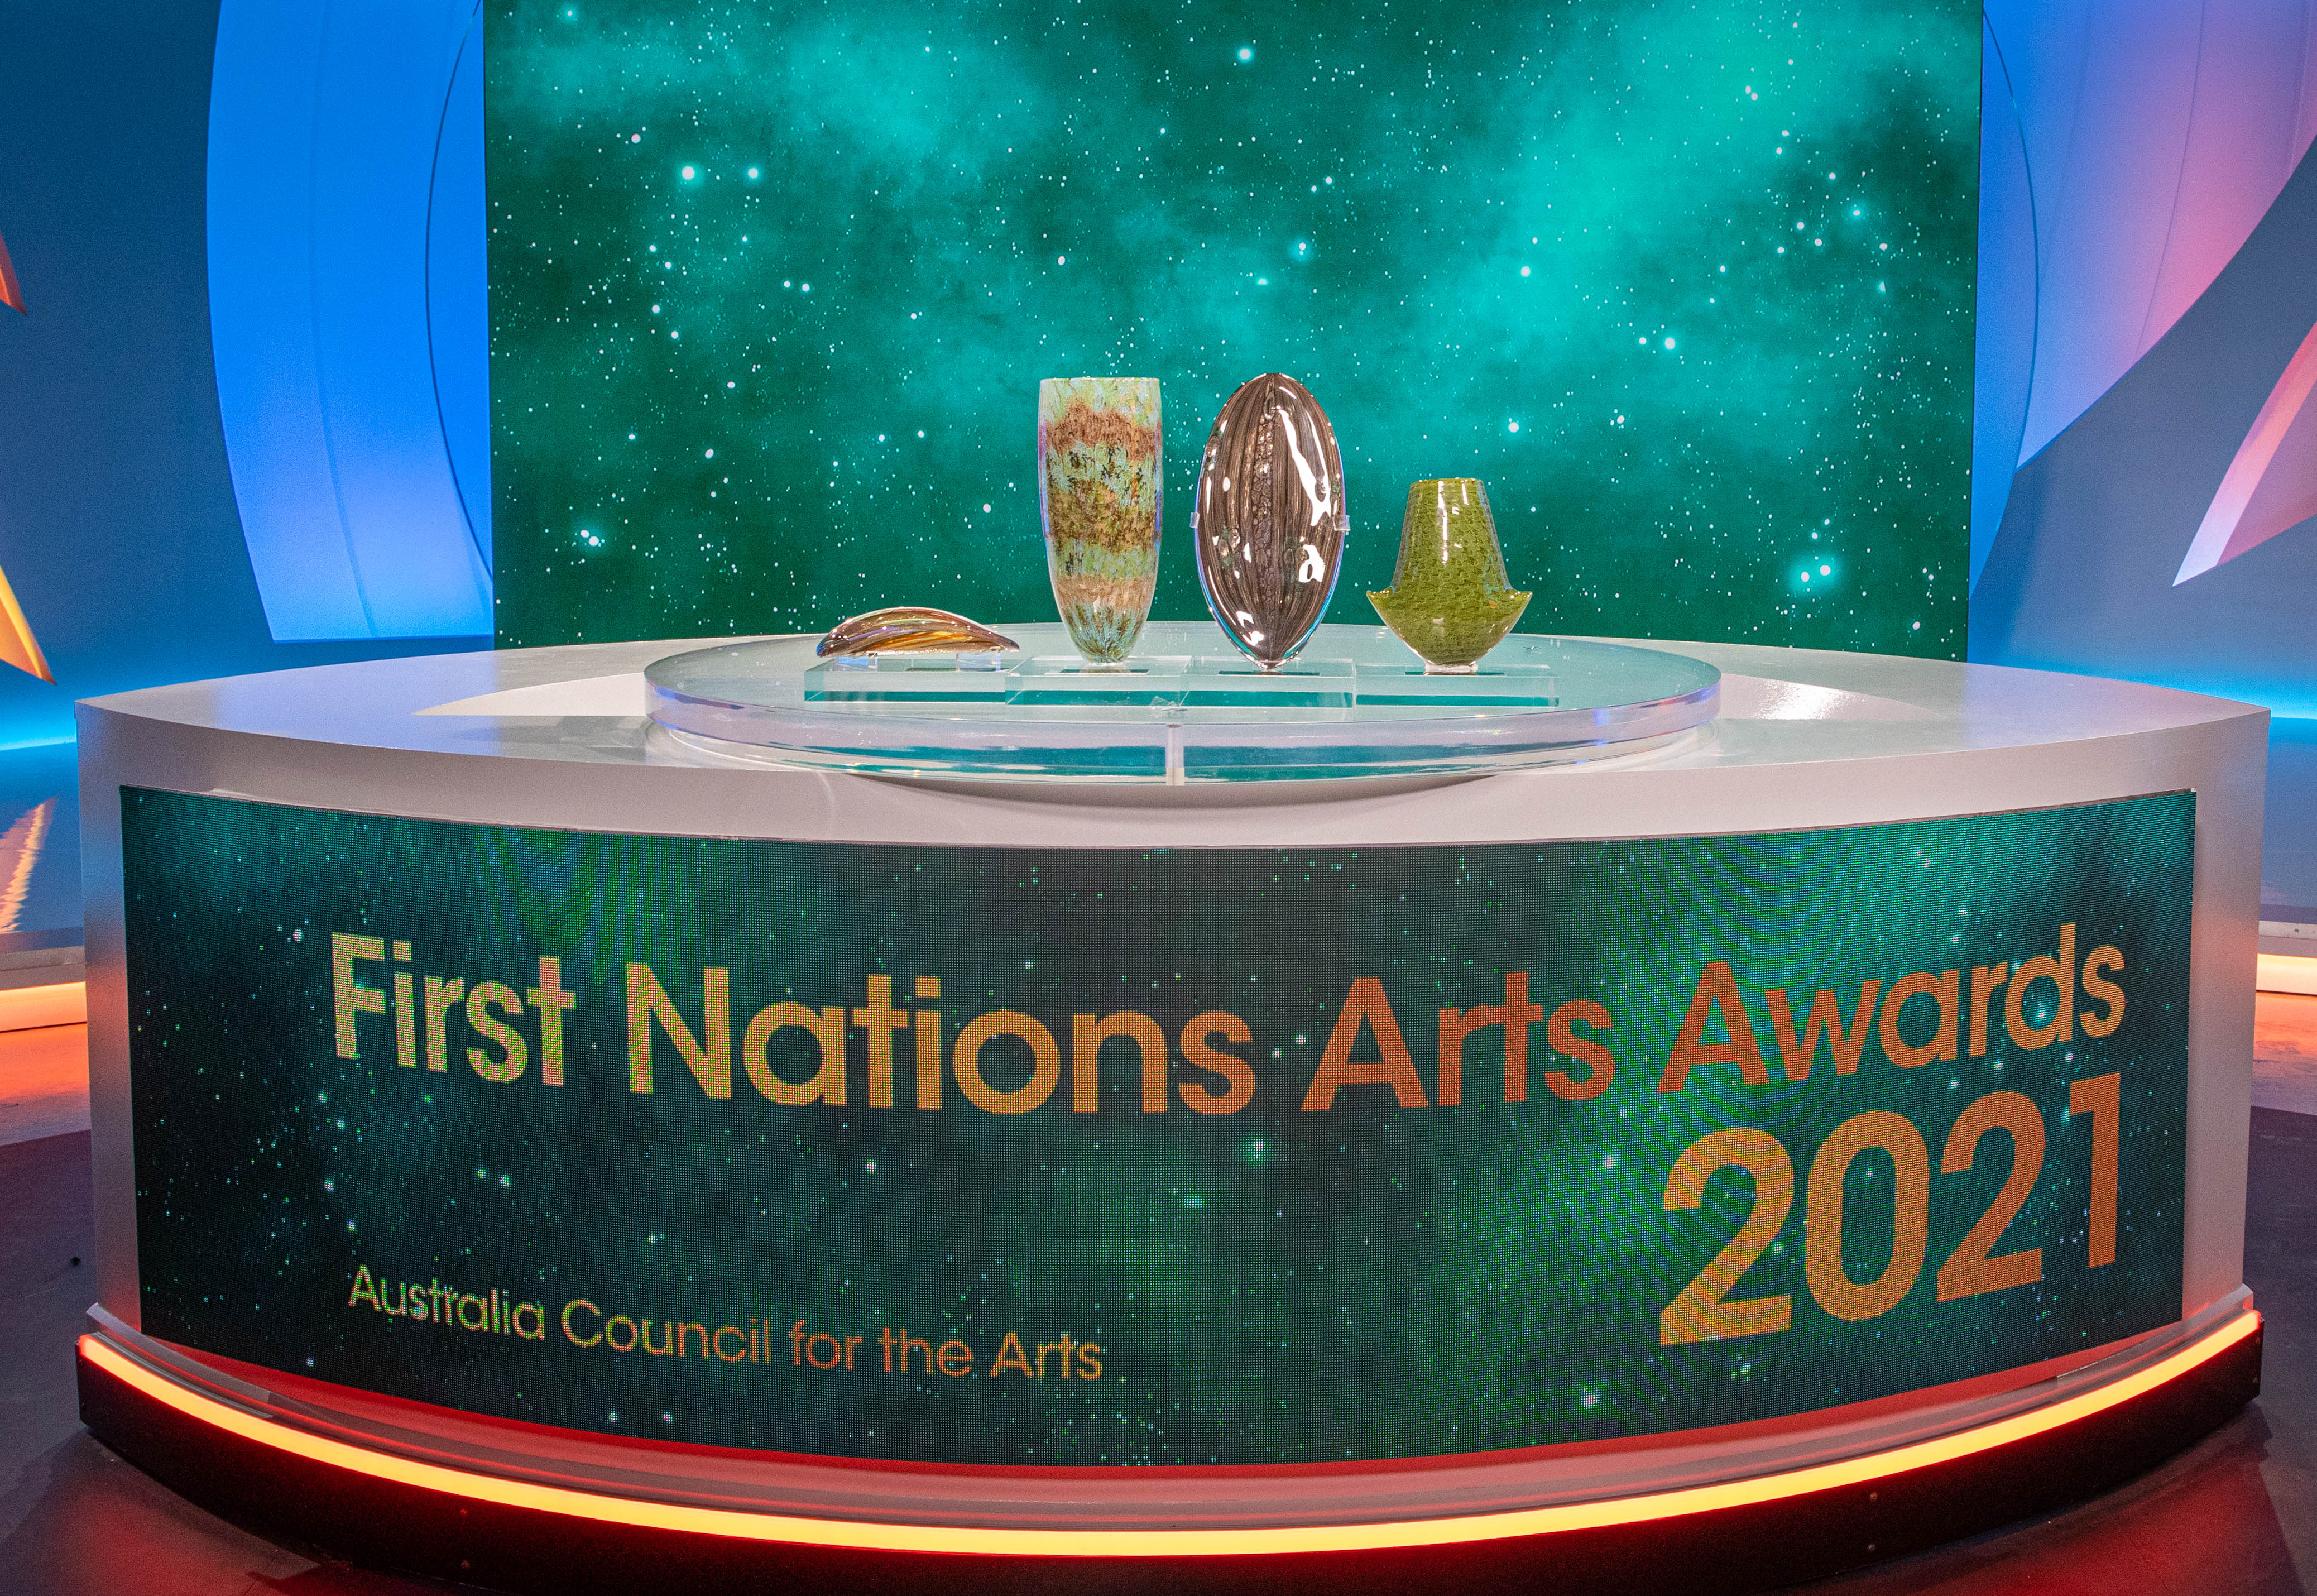 The Australia Council announces recipients of 2021 First Nations Arts Awards